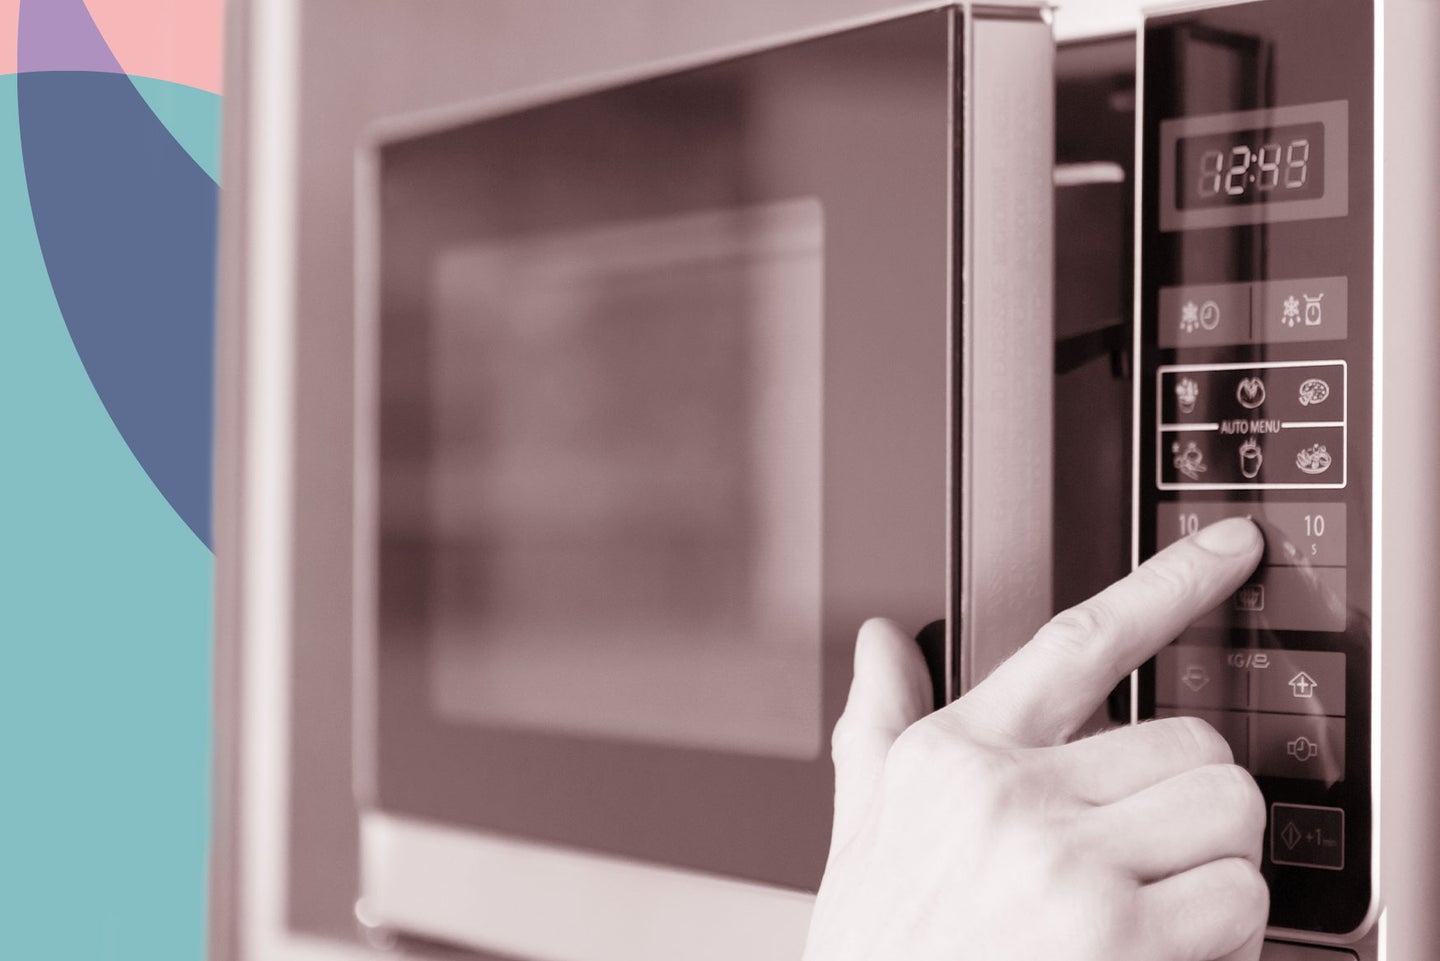 A person pressing buttons on a microwave oven.